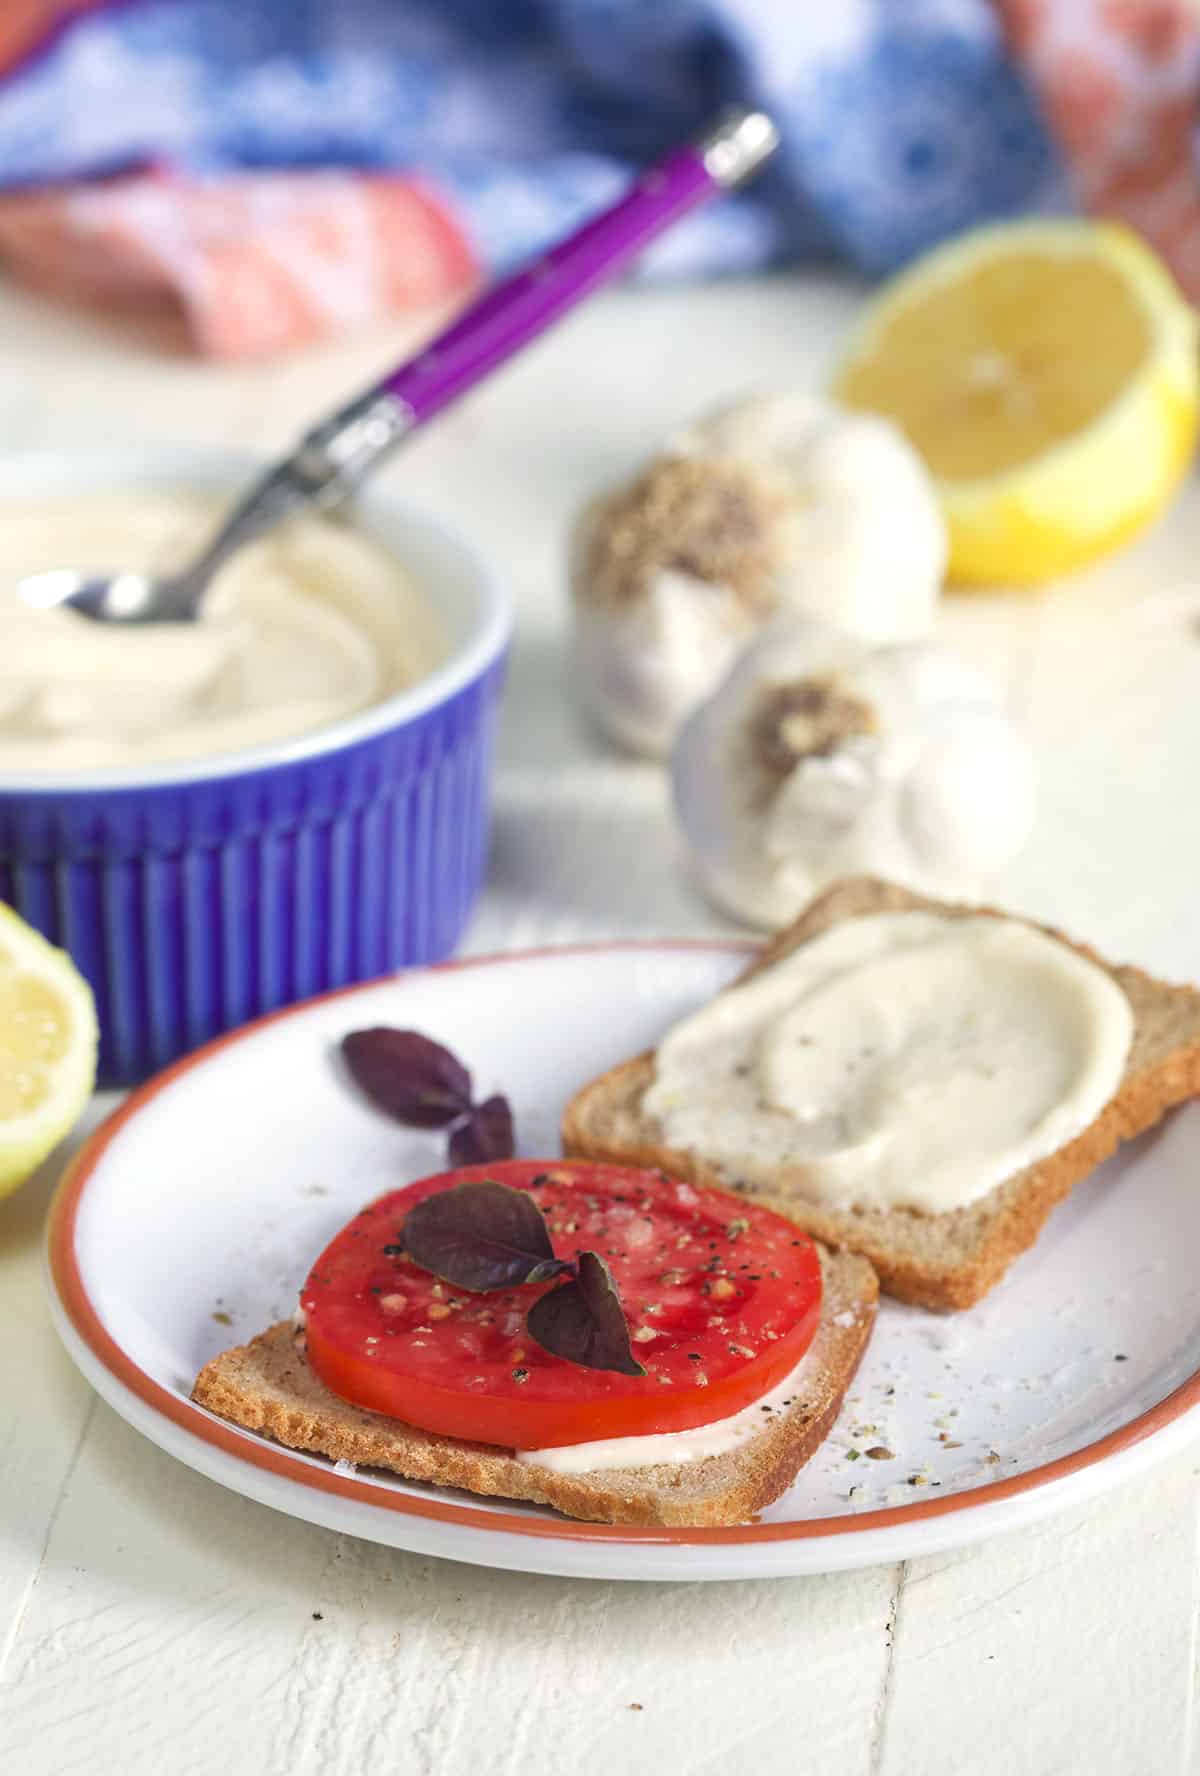 Tomato on a small slice of bread with aioli spread on a second slice on a white plate.